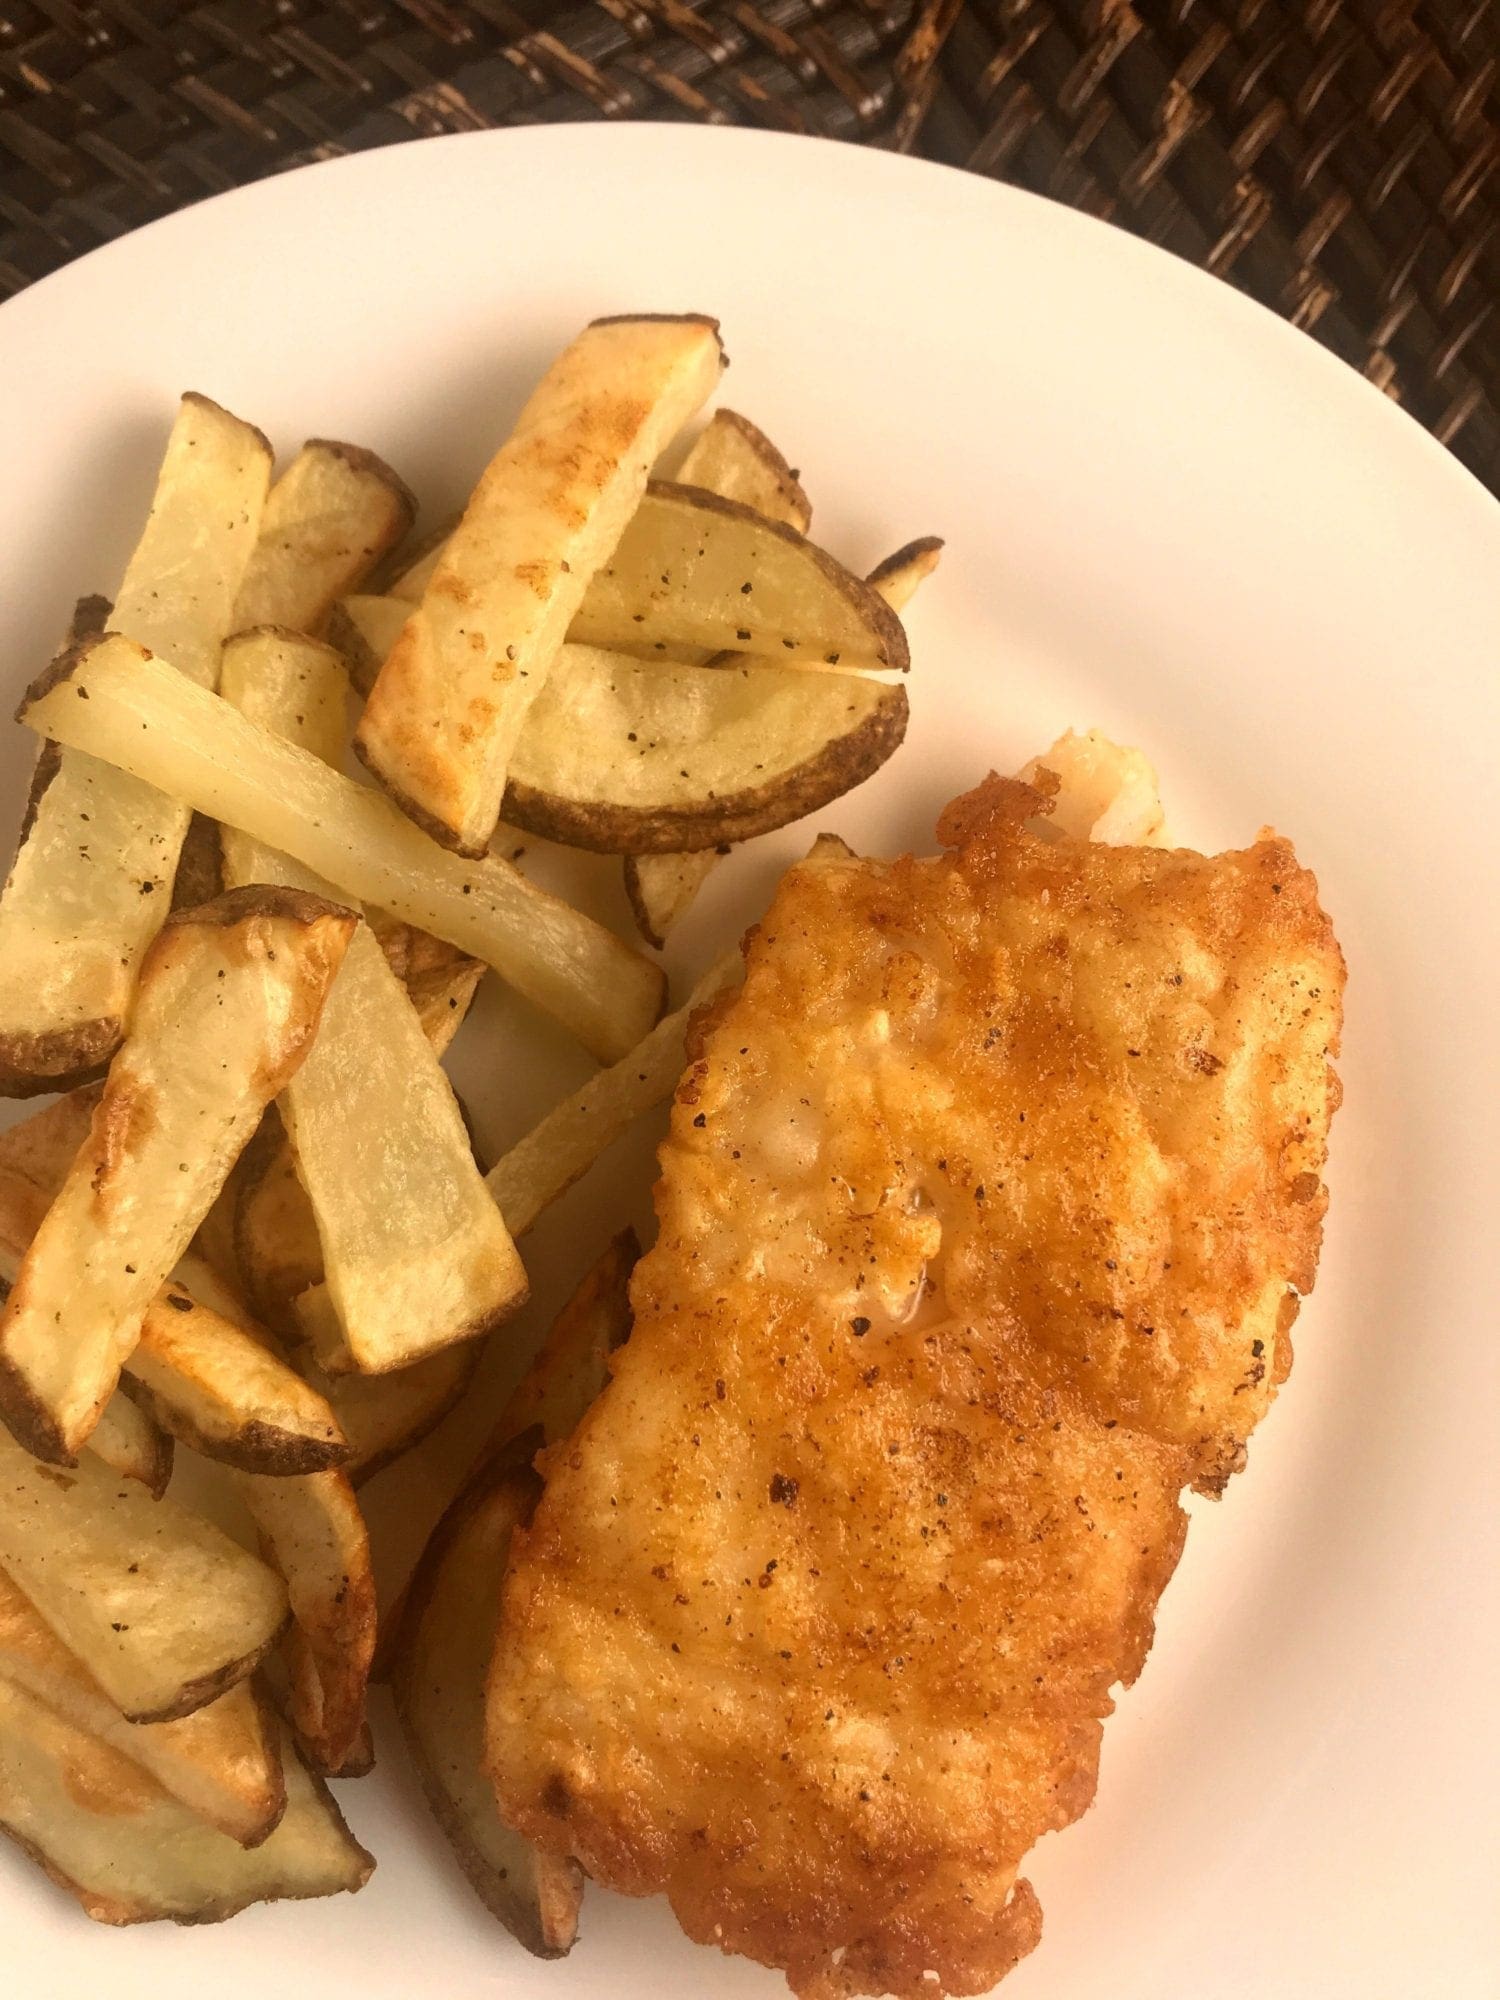 Healthy battered cod fish and chips perfect for anyone on the WW (Weight Watchers) program. Just 6 WW FreeStyle SmartPoints per battered fish fillet and one serving of fries!